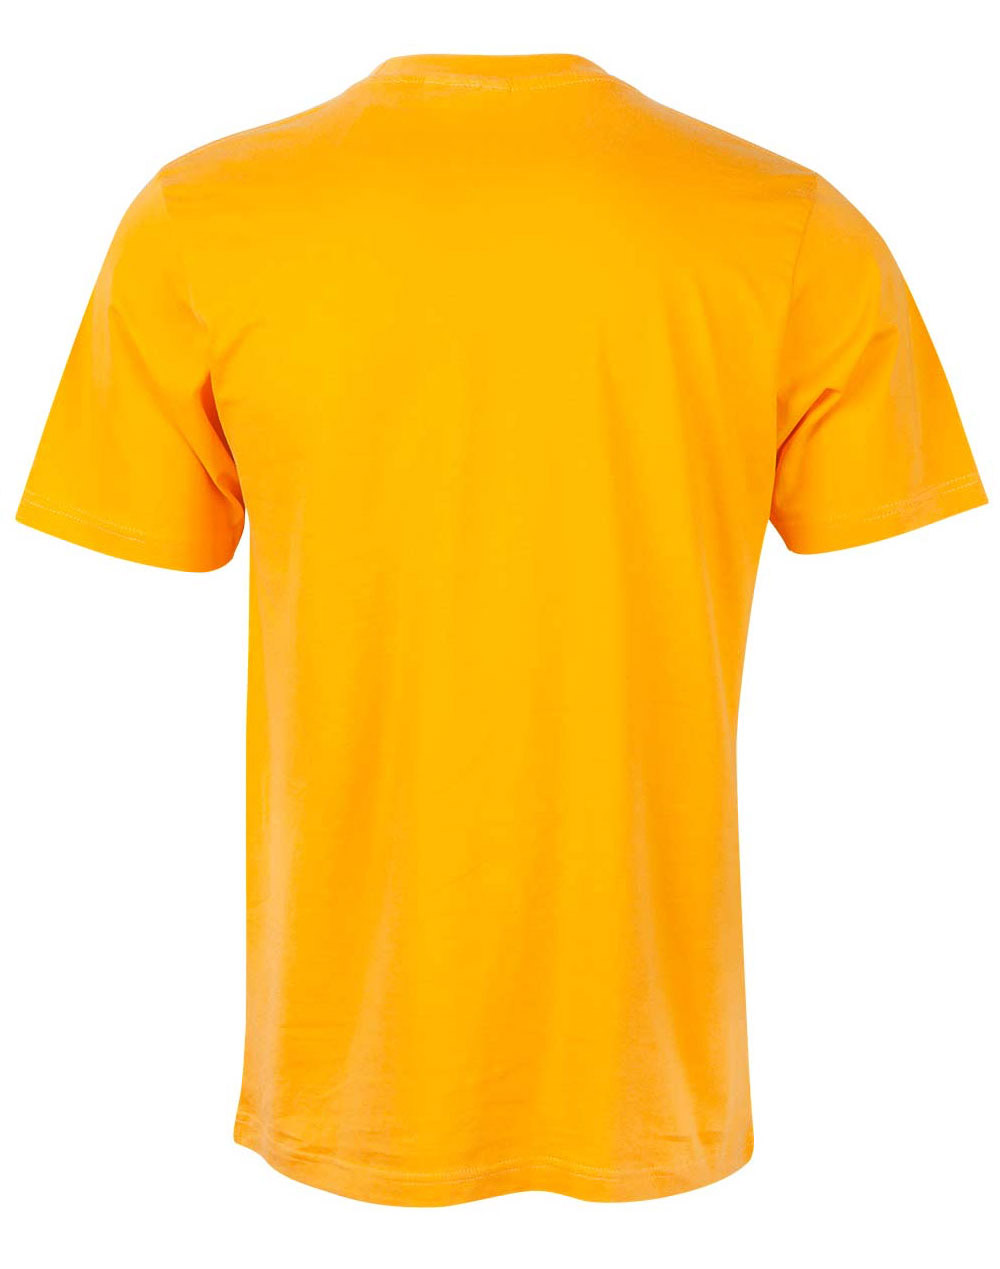 Personalized Semi-Fitted T-Shirts Men's Online in Perh Australia